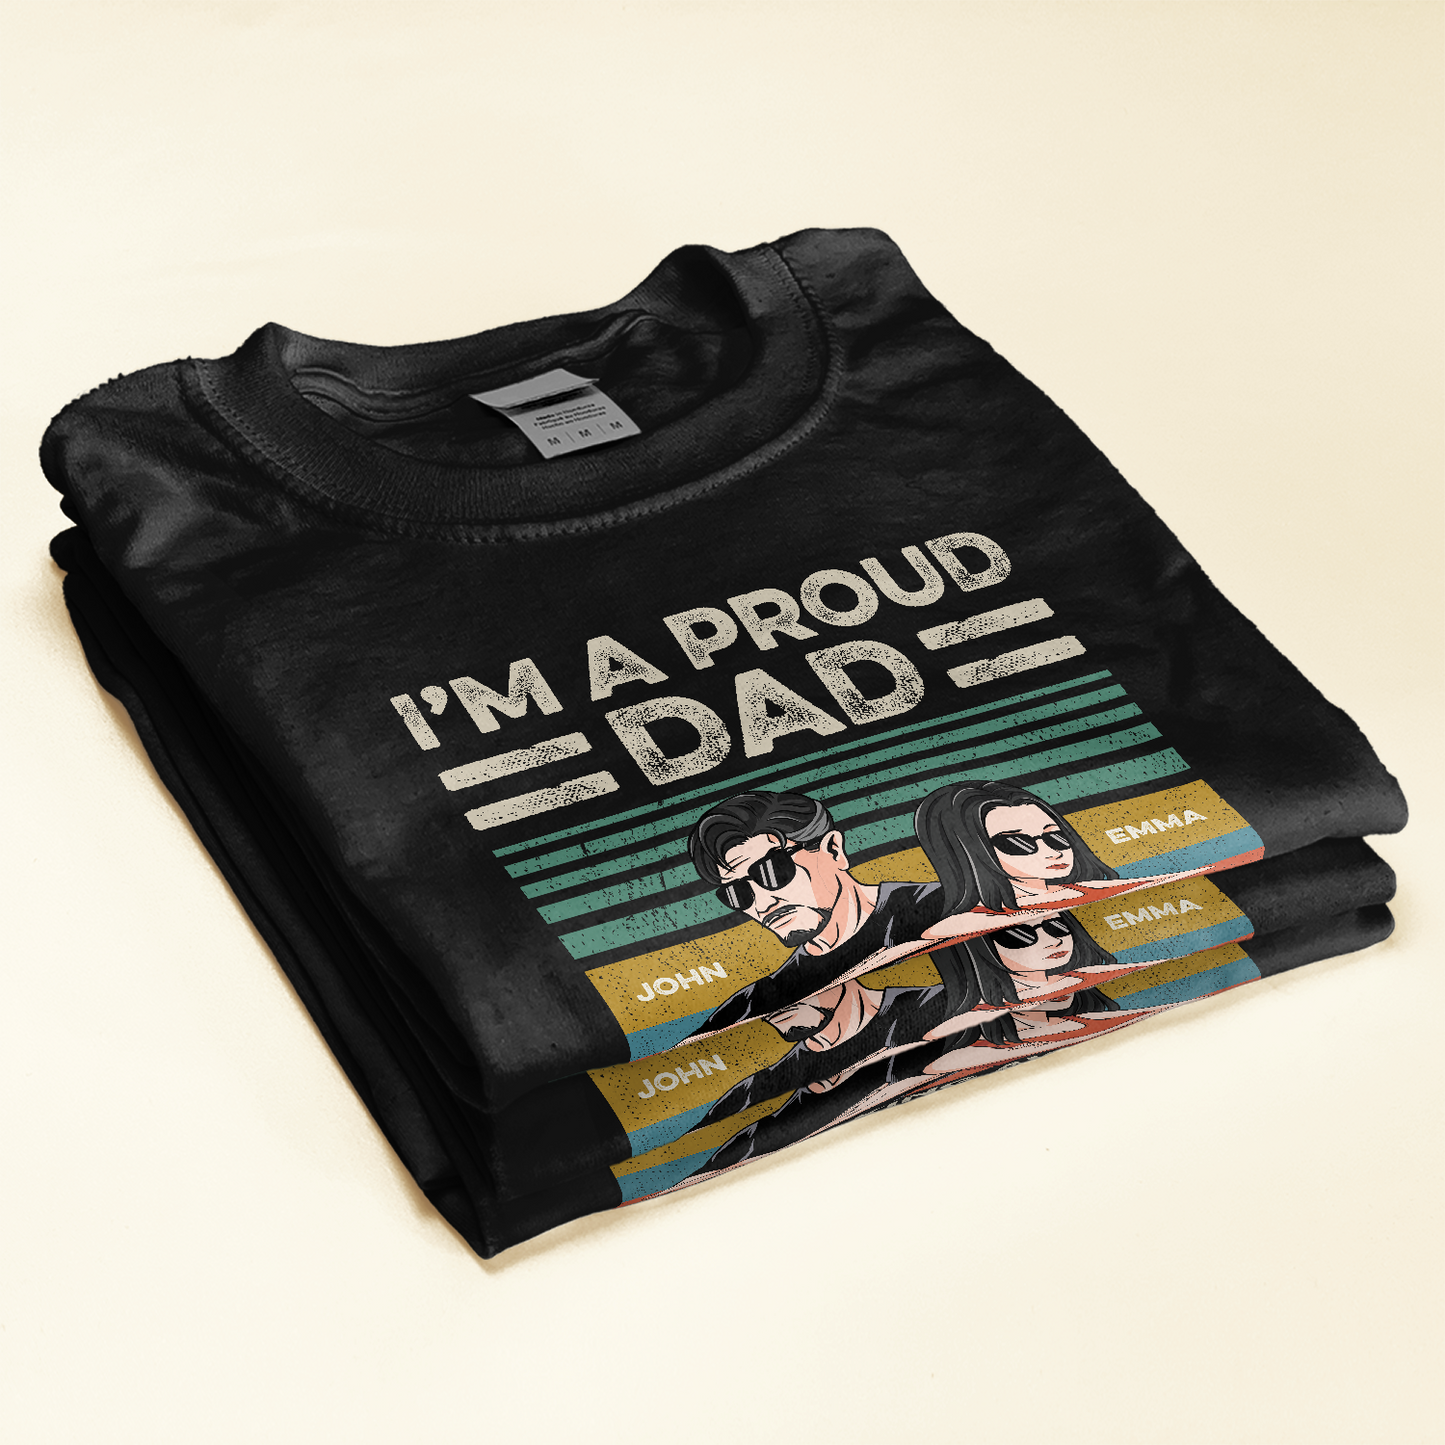 Proud Dad Of Freaking Awesome Daughter - Personalized Shirt